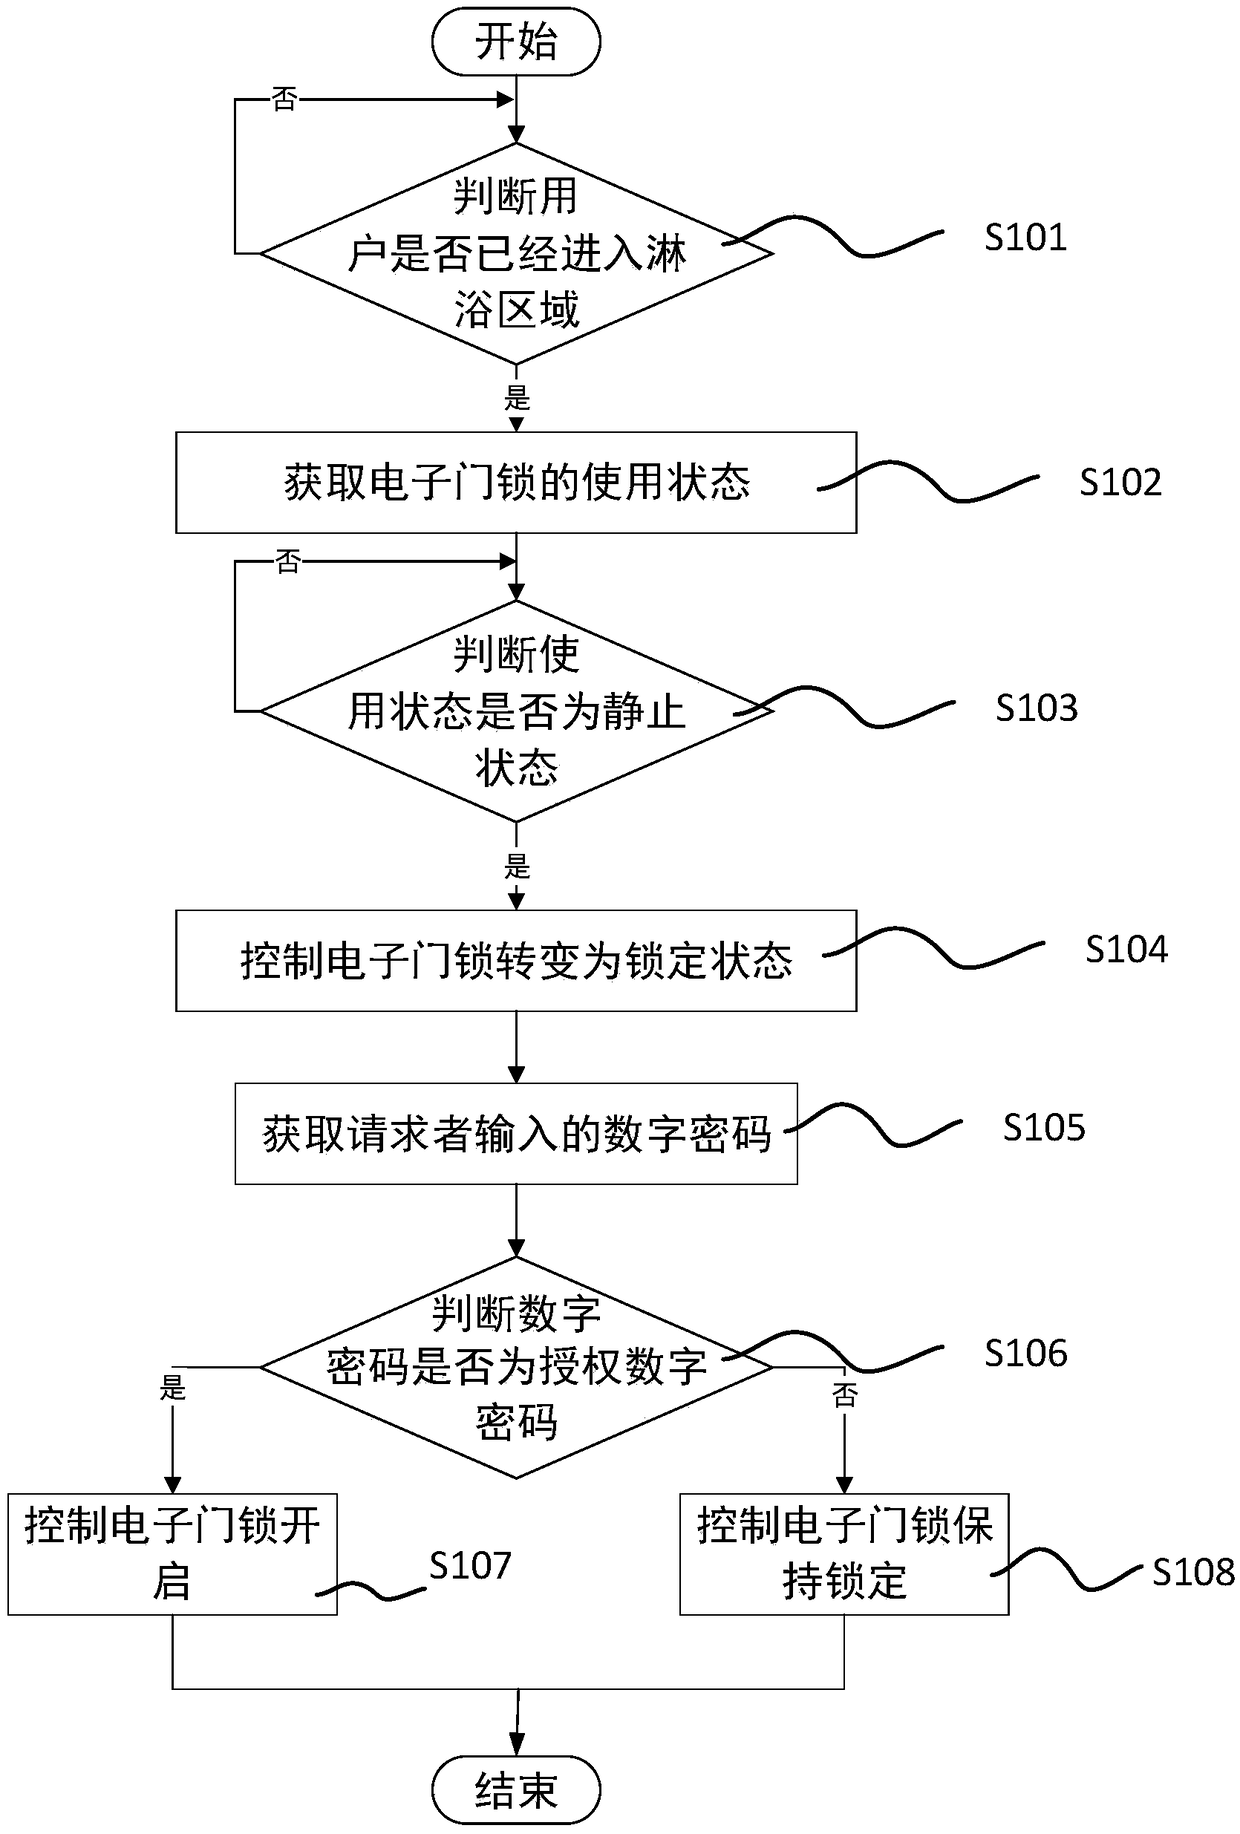 Control method used for household safety protection system